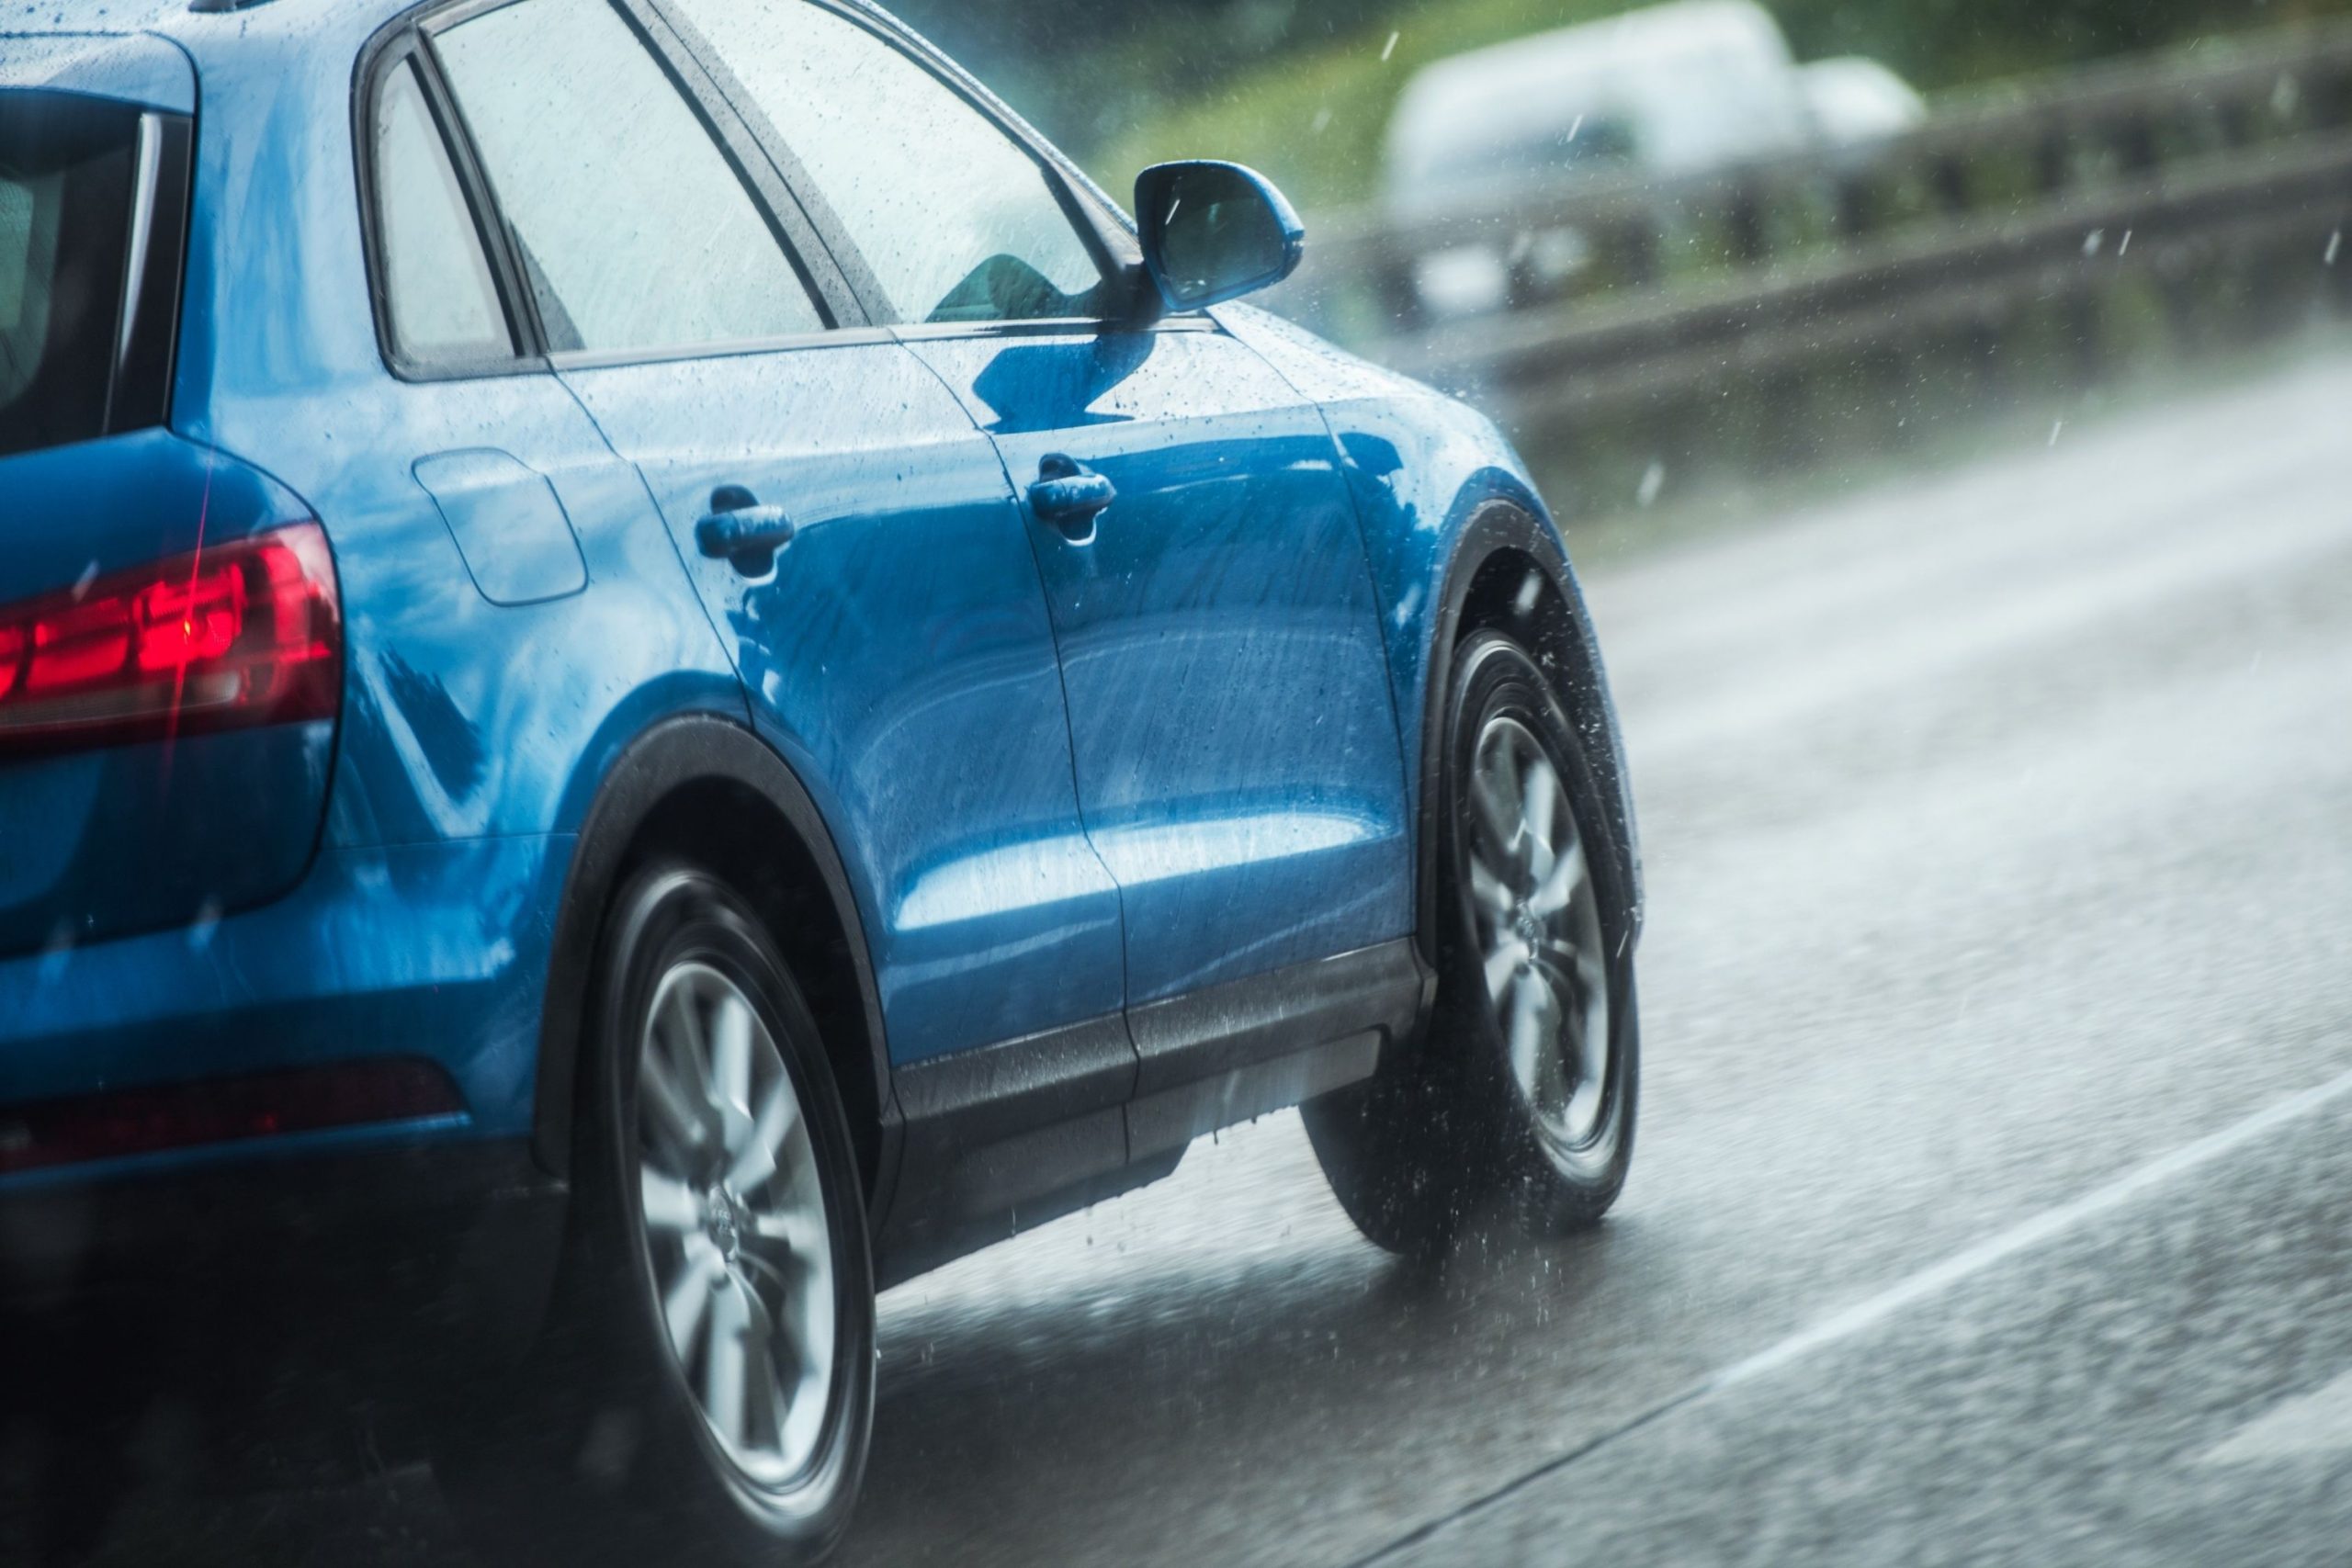 How to Keep Car Windows From Fogging Up In the Rain